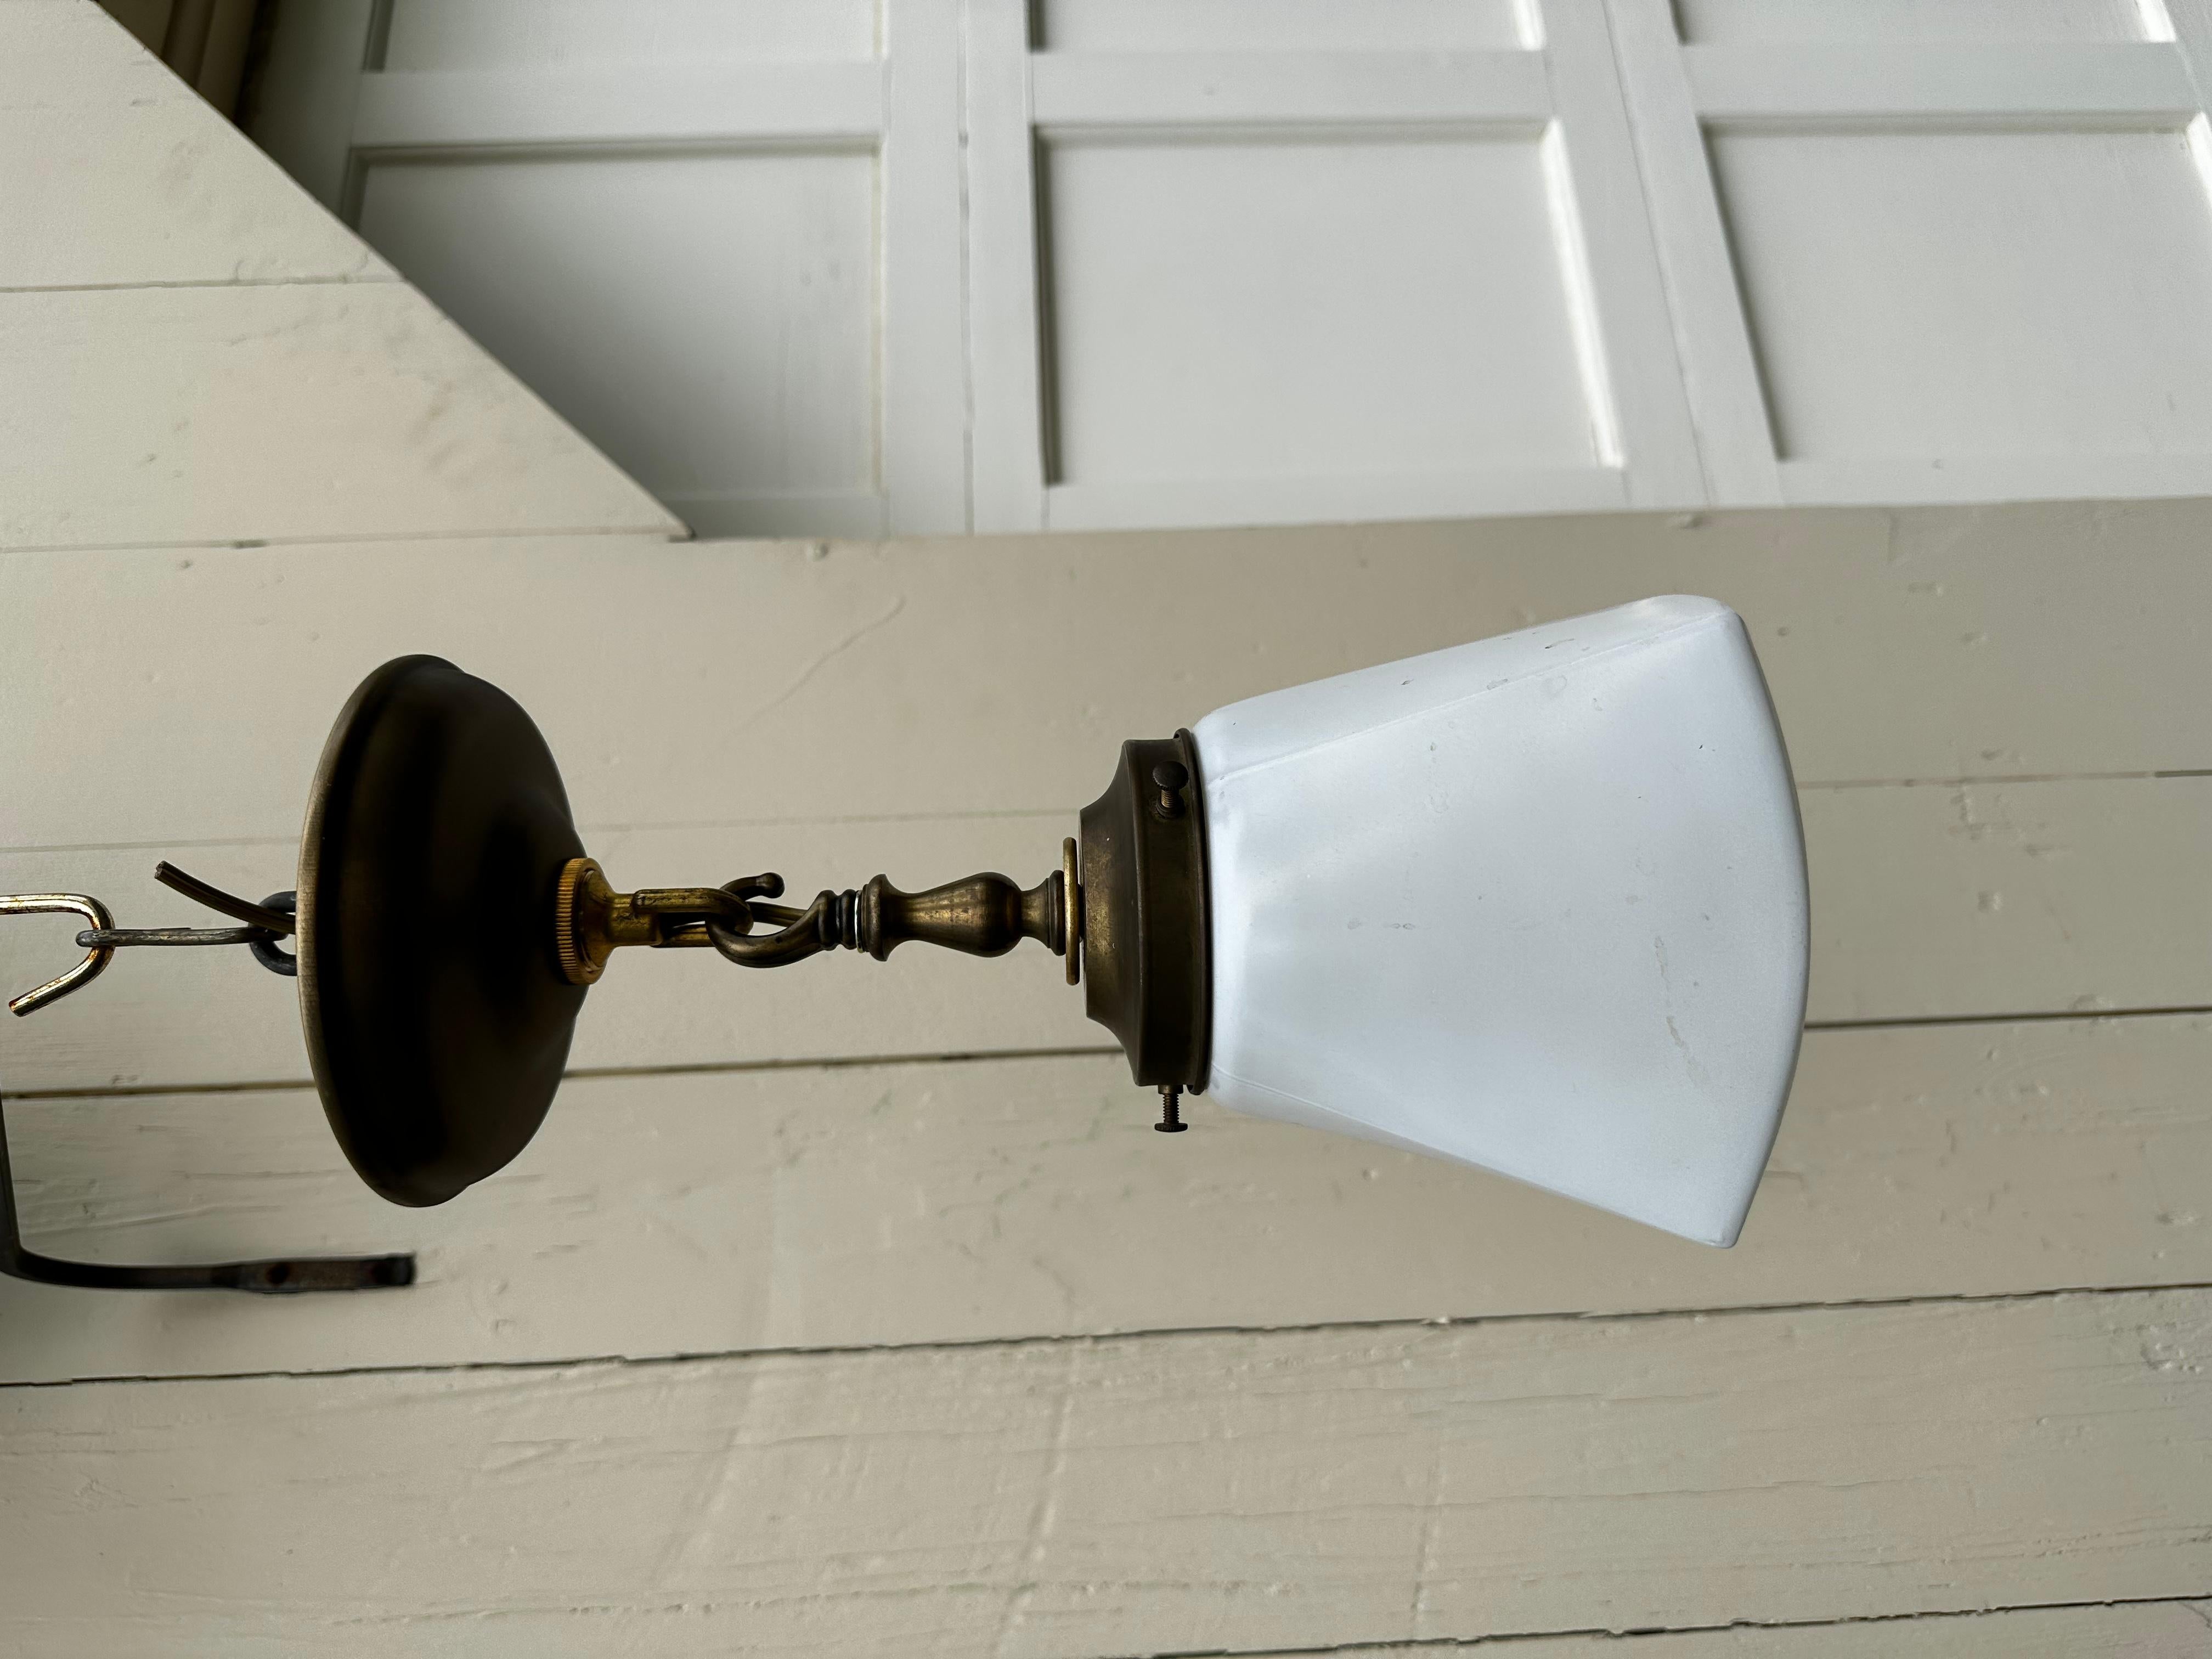 Old Lights On is pleased to offer this vintage brass ceiling fixture with vintage deco shade. It is rewired and ready to install. We ship everywhere. Great patina, excellent condition. Goes great with other fixtures and furnishings. Follow us here